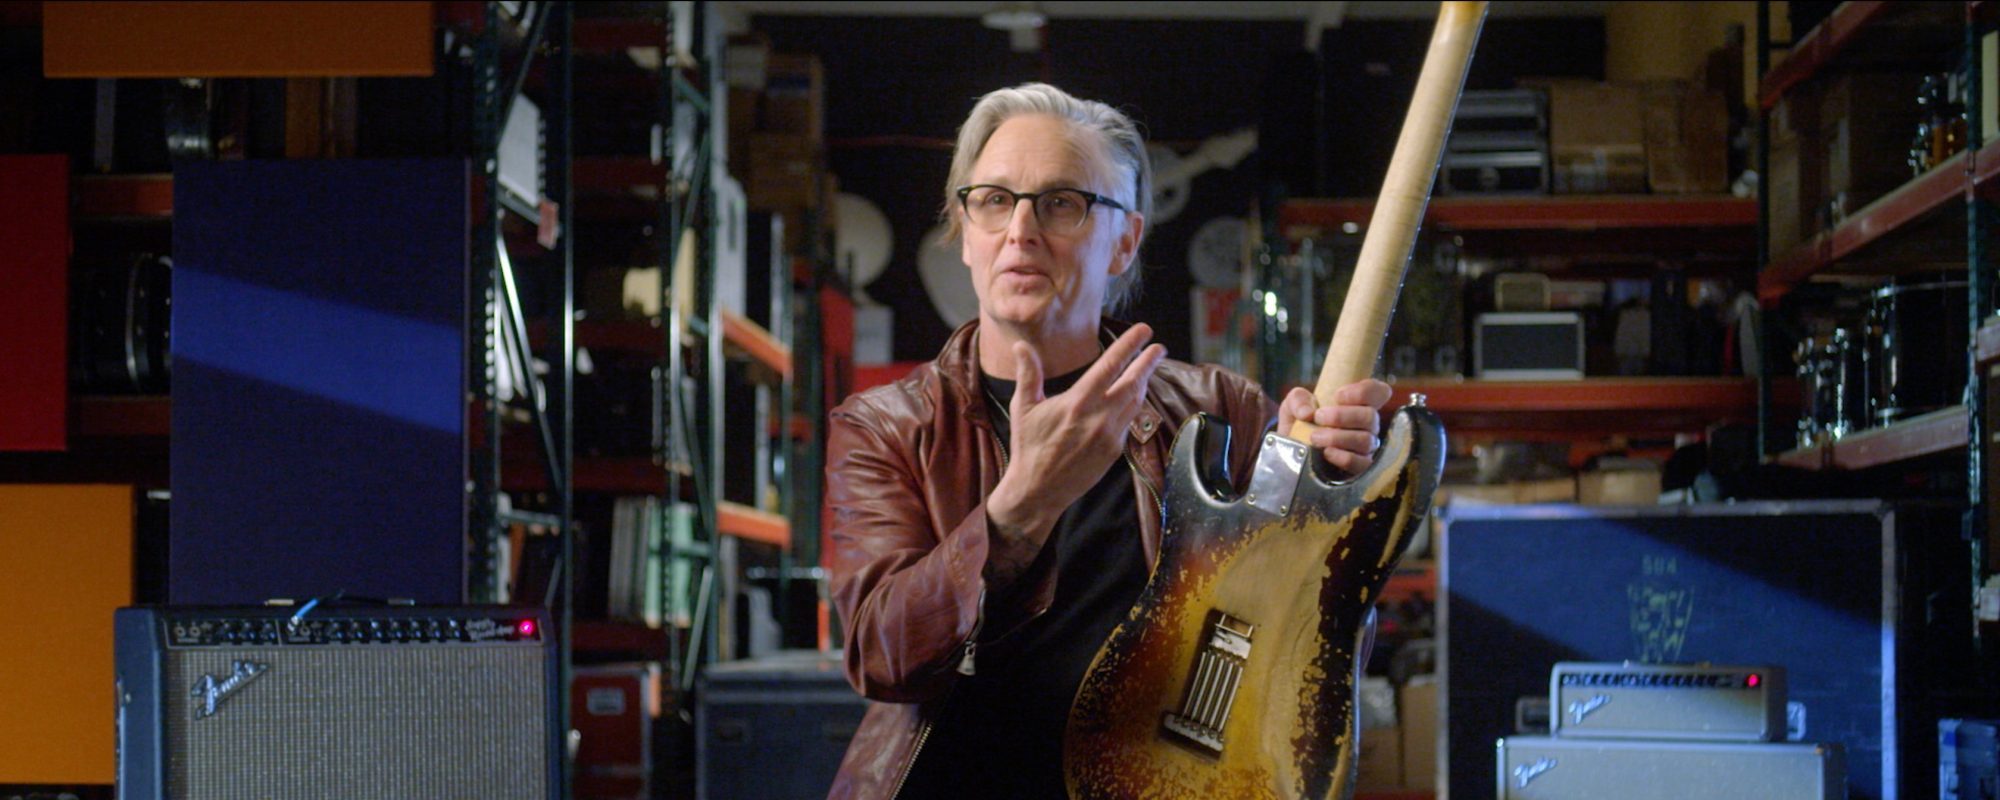 22-Year-Old Side Project from Pearl Jam’s Mike McCready Gets New Digital Release